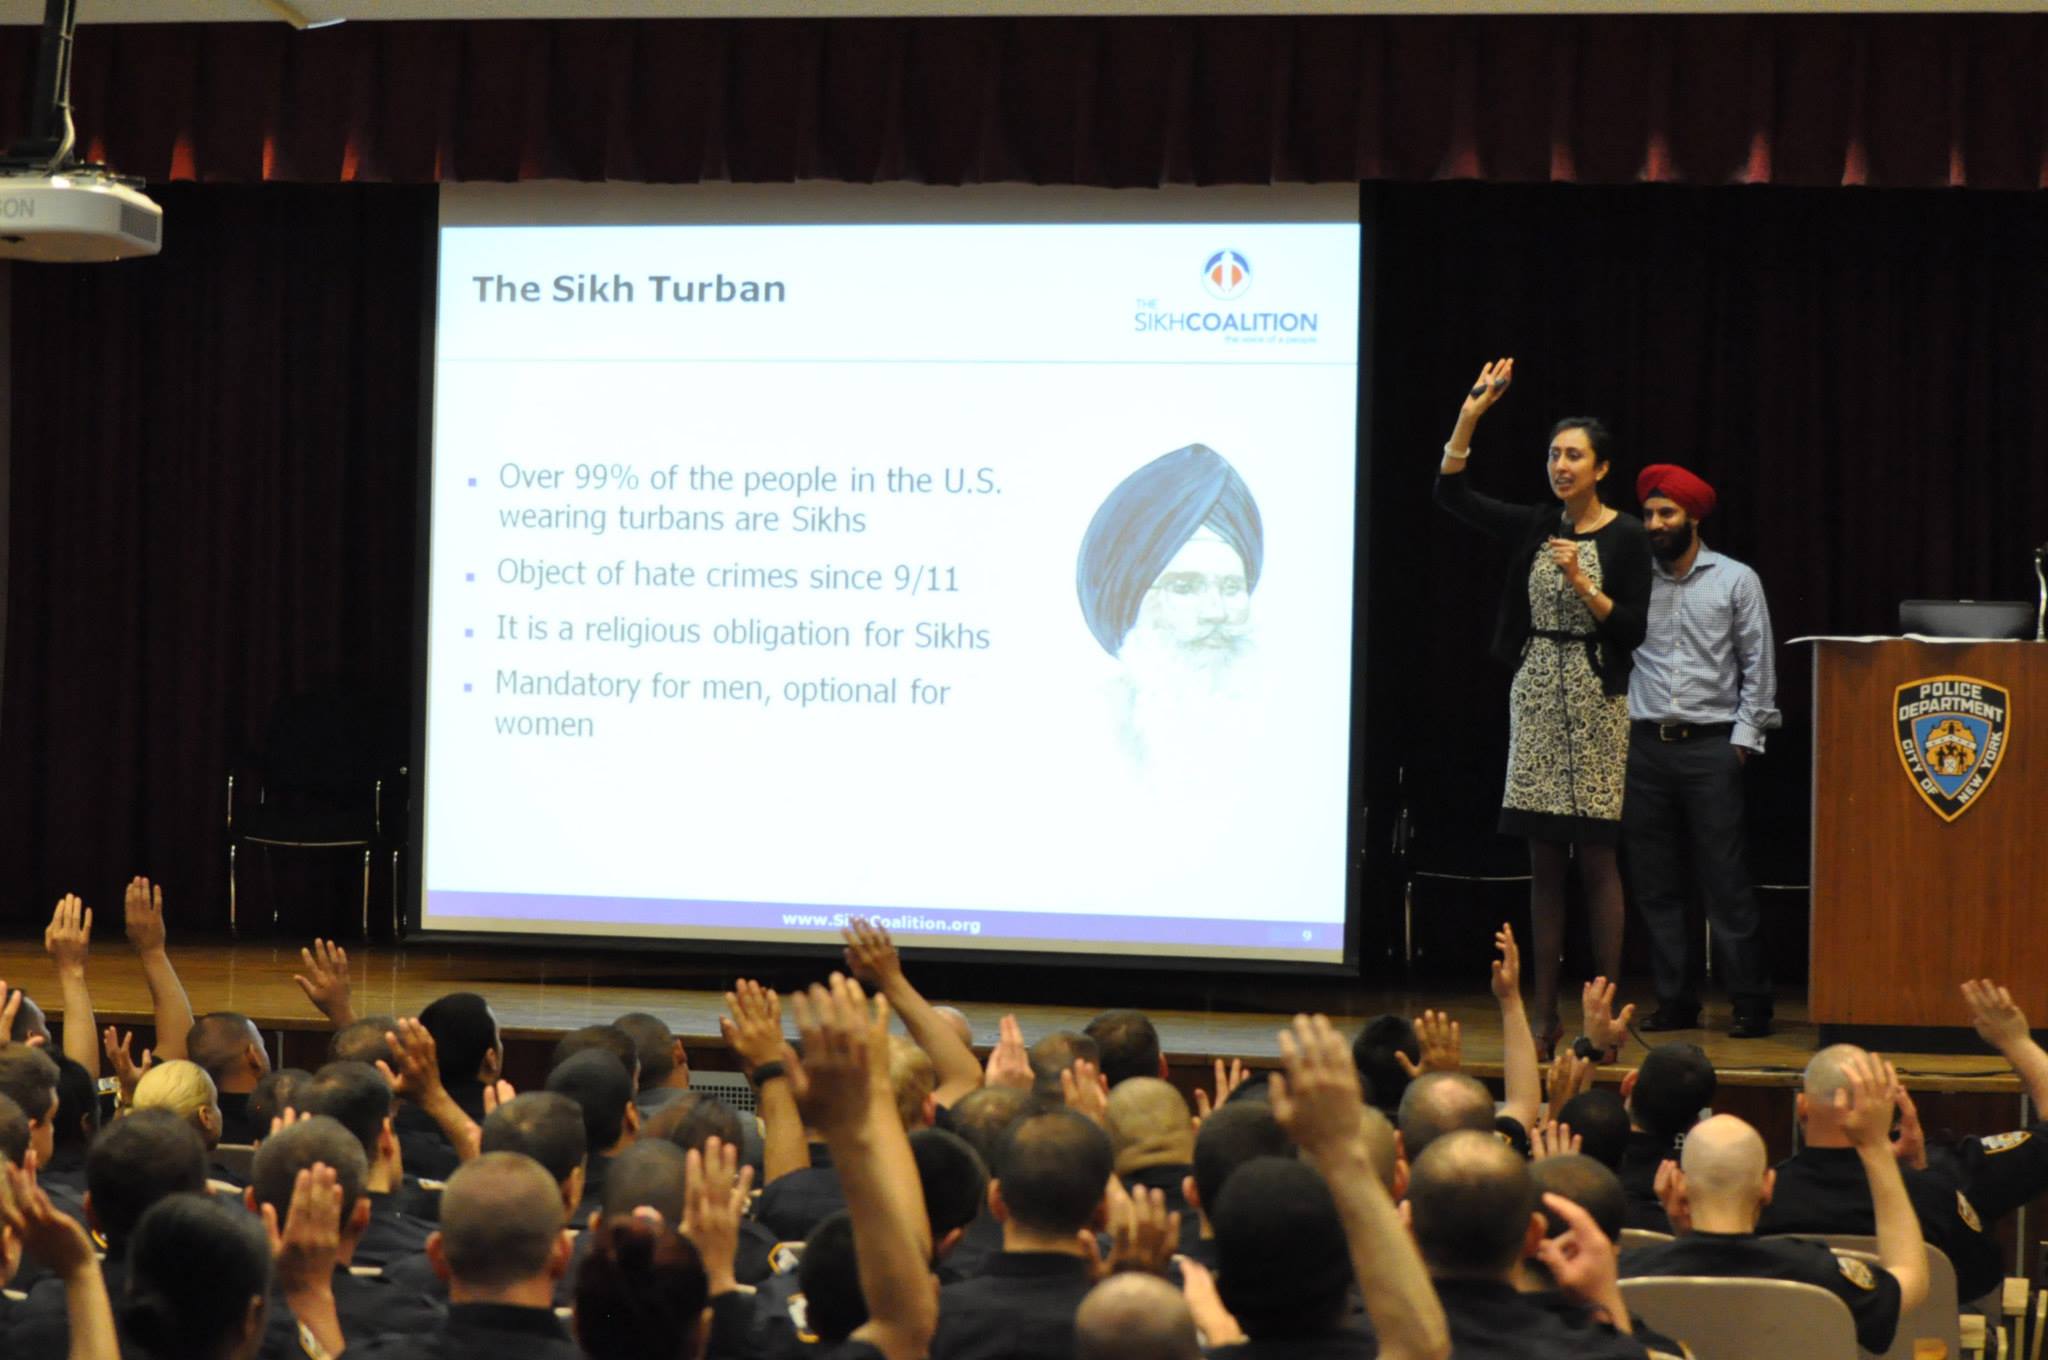 Jaspreet Bansal and Kiratbir Singh lead the presentation on Sikhs and Sikh practices for the new NYPD officers.